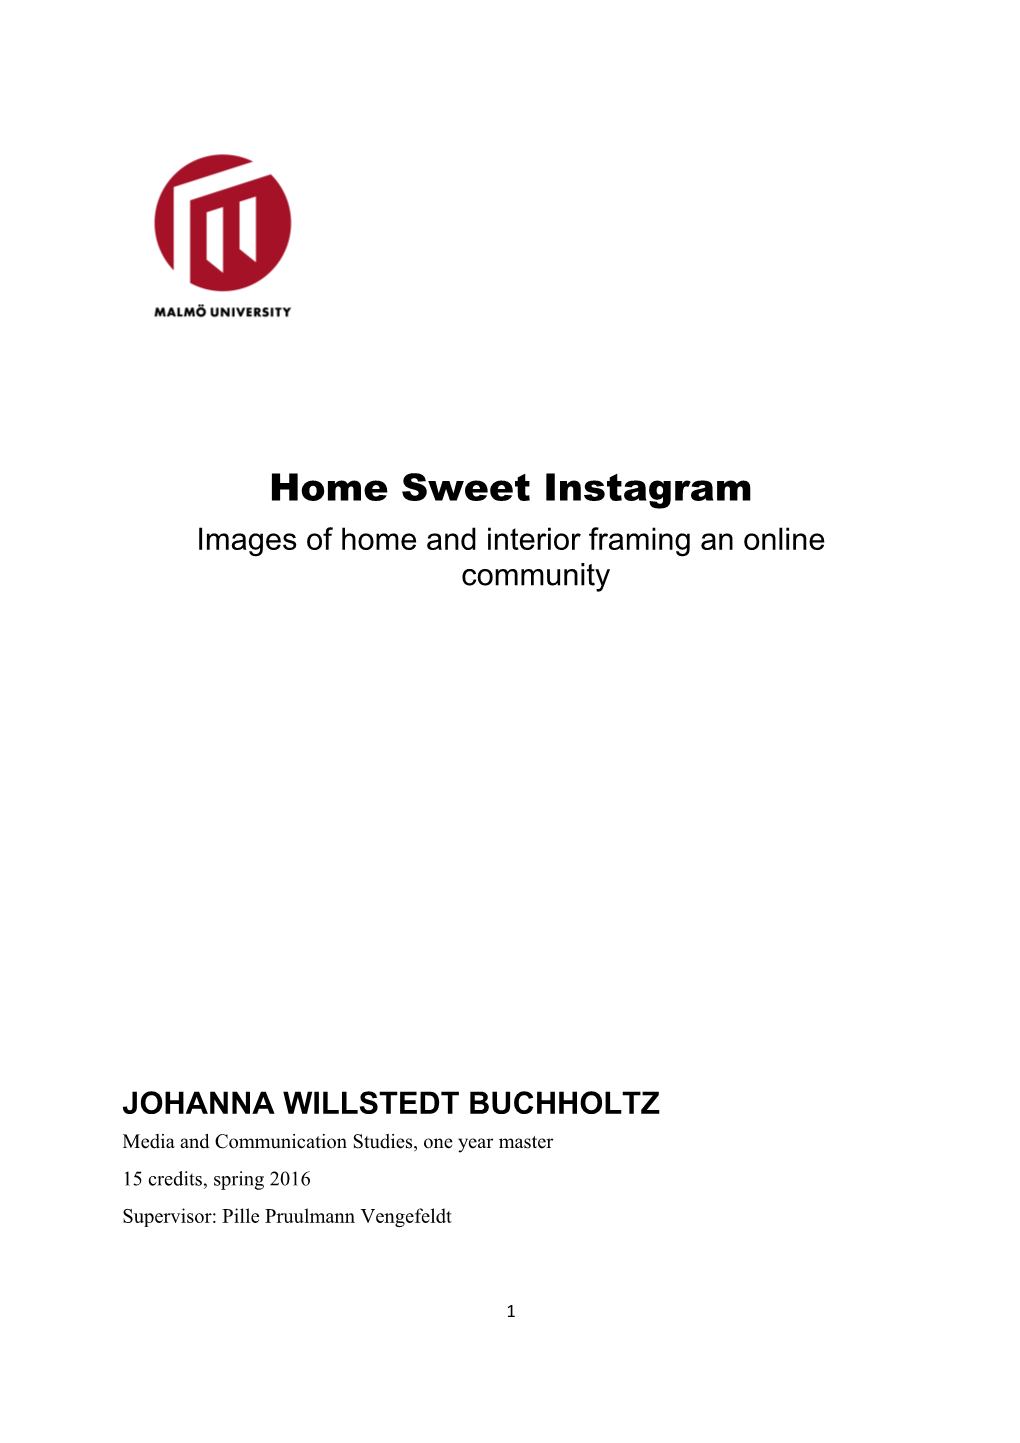 Home Sweet Instagram Images of Home and Interior Framing an Online Community